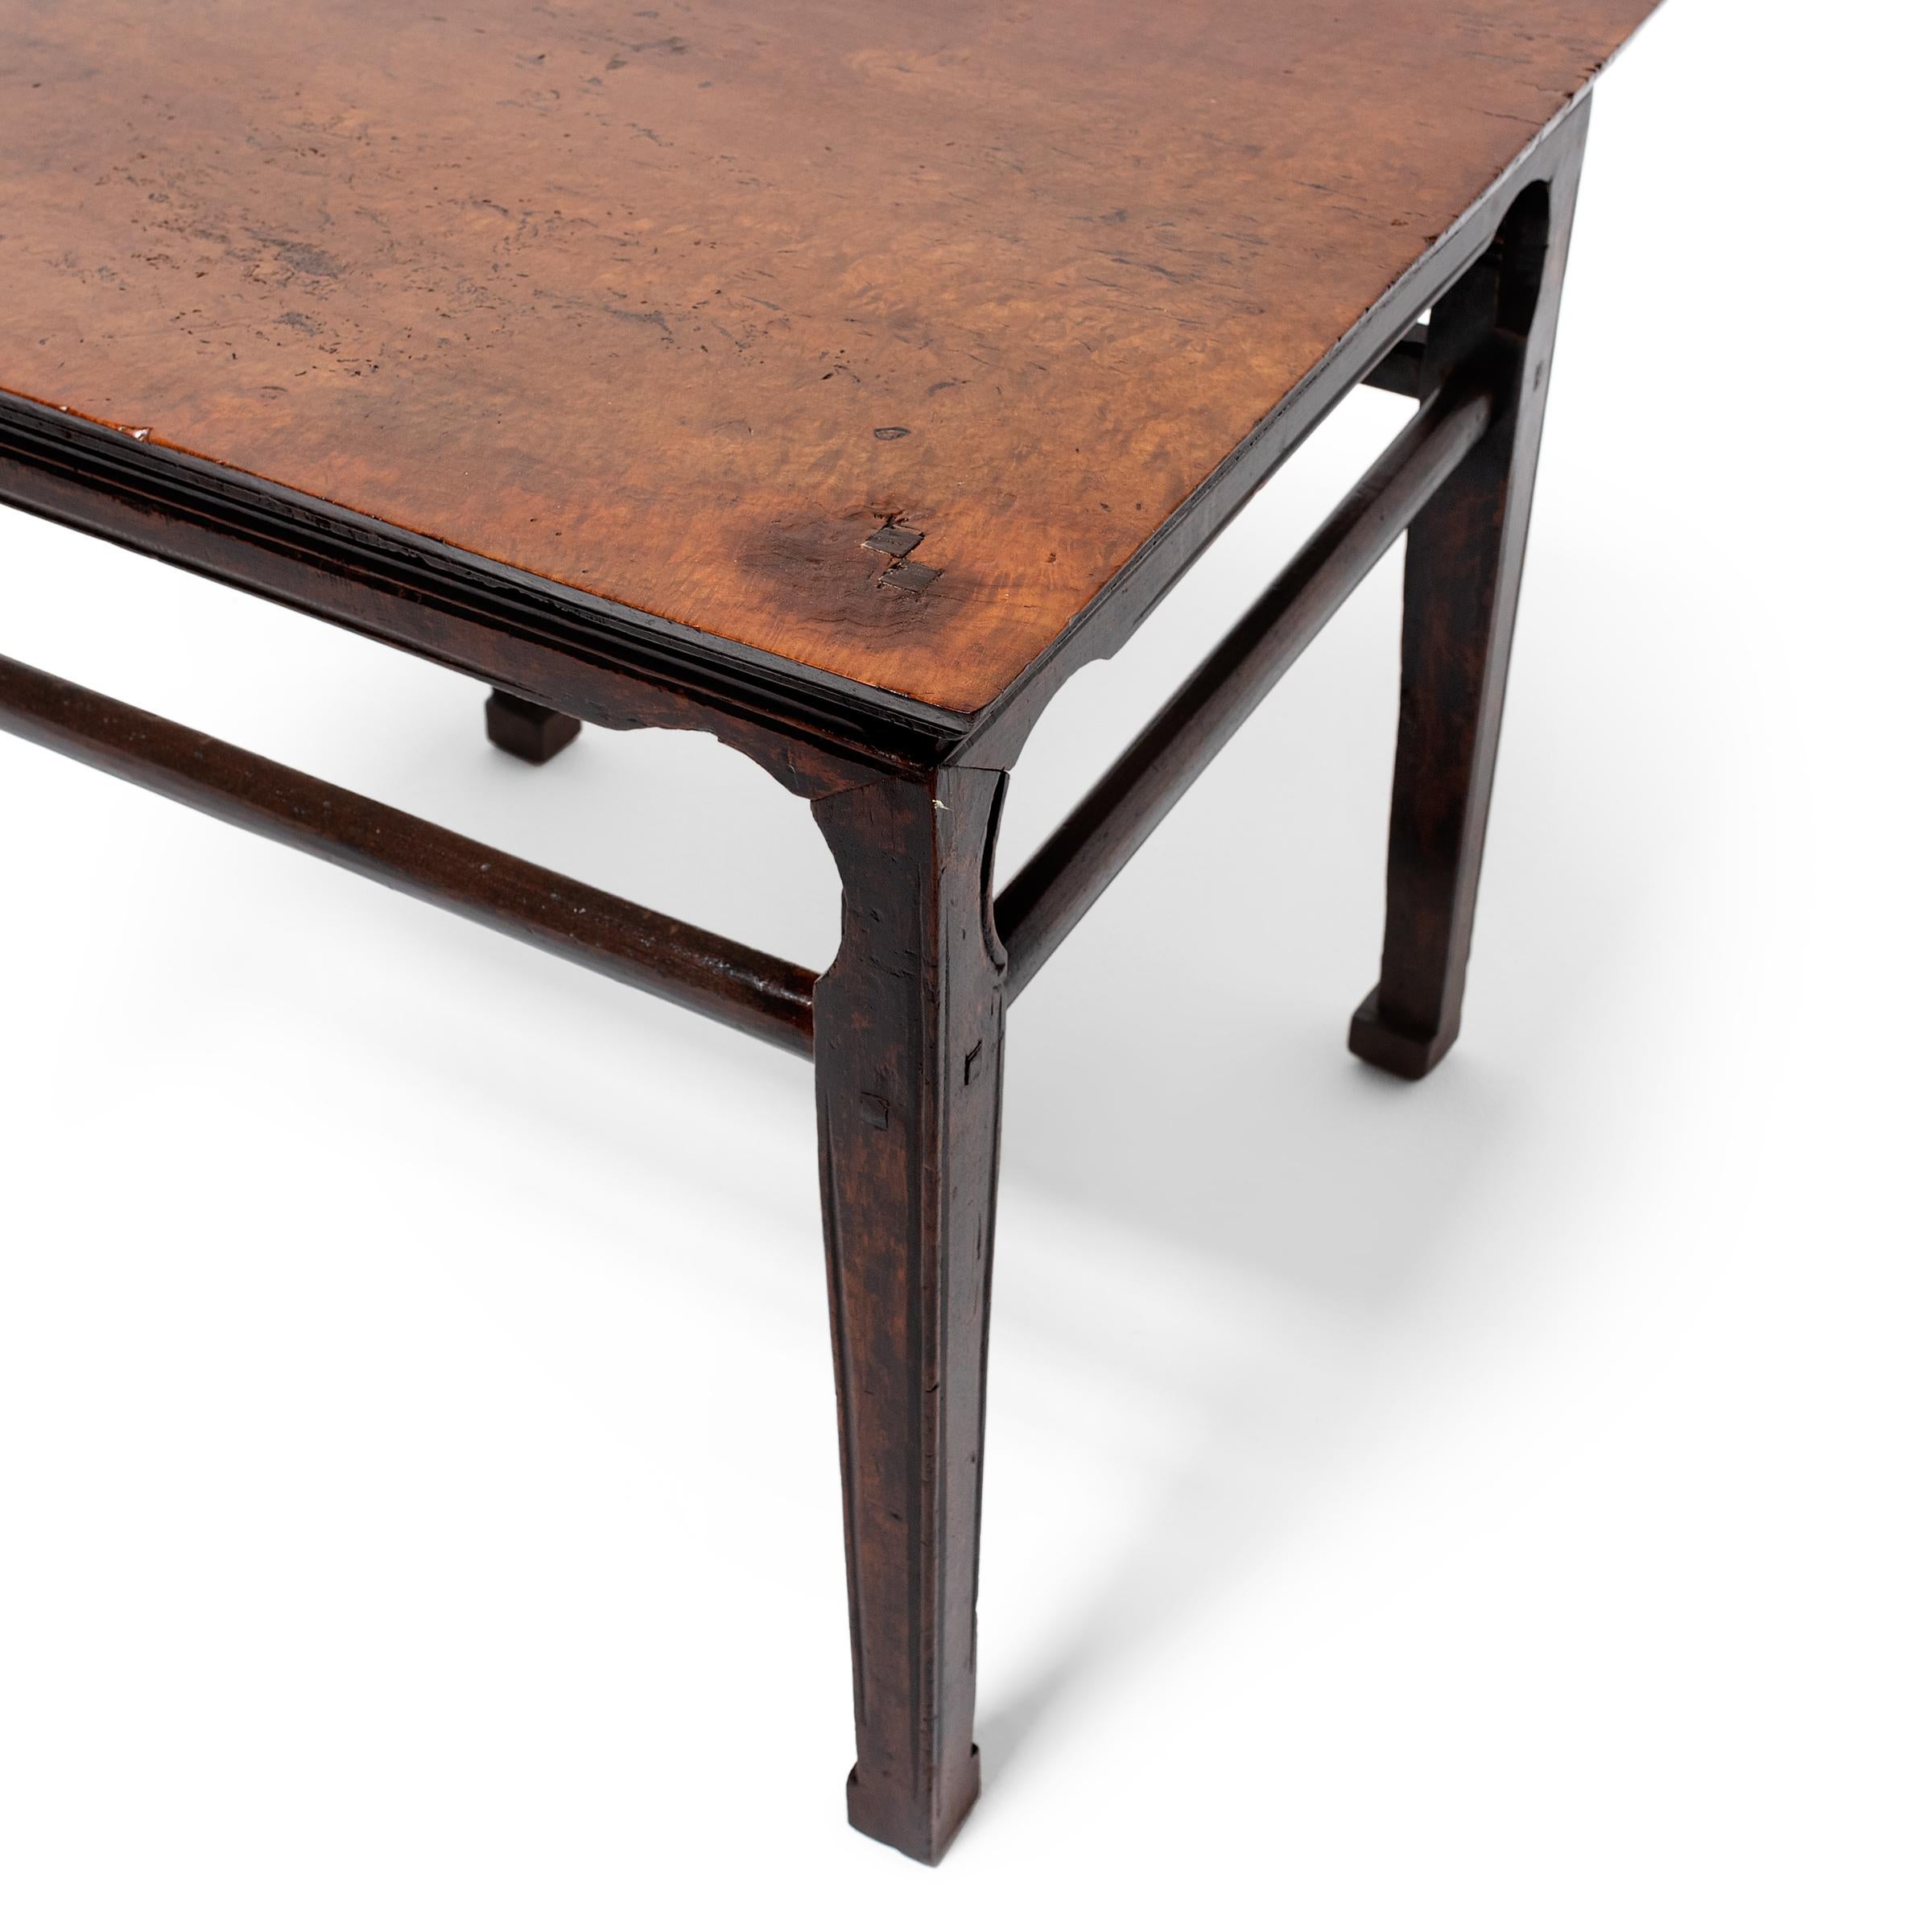 19th Century Chinese Square Burlwood Table, c. 1850 For Sale